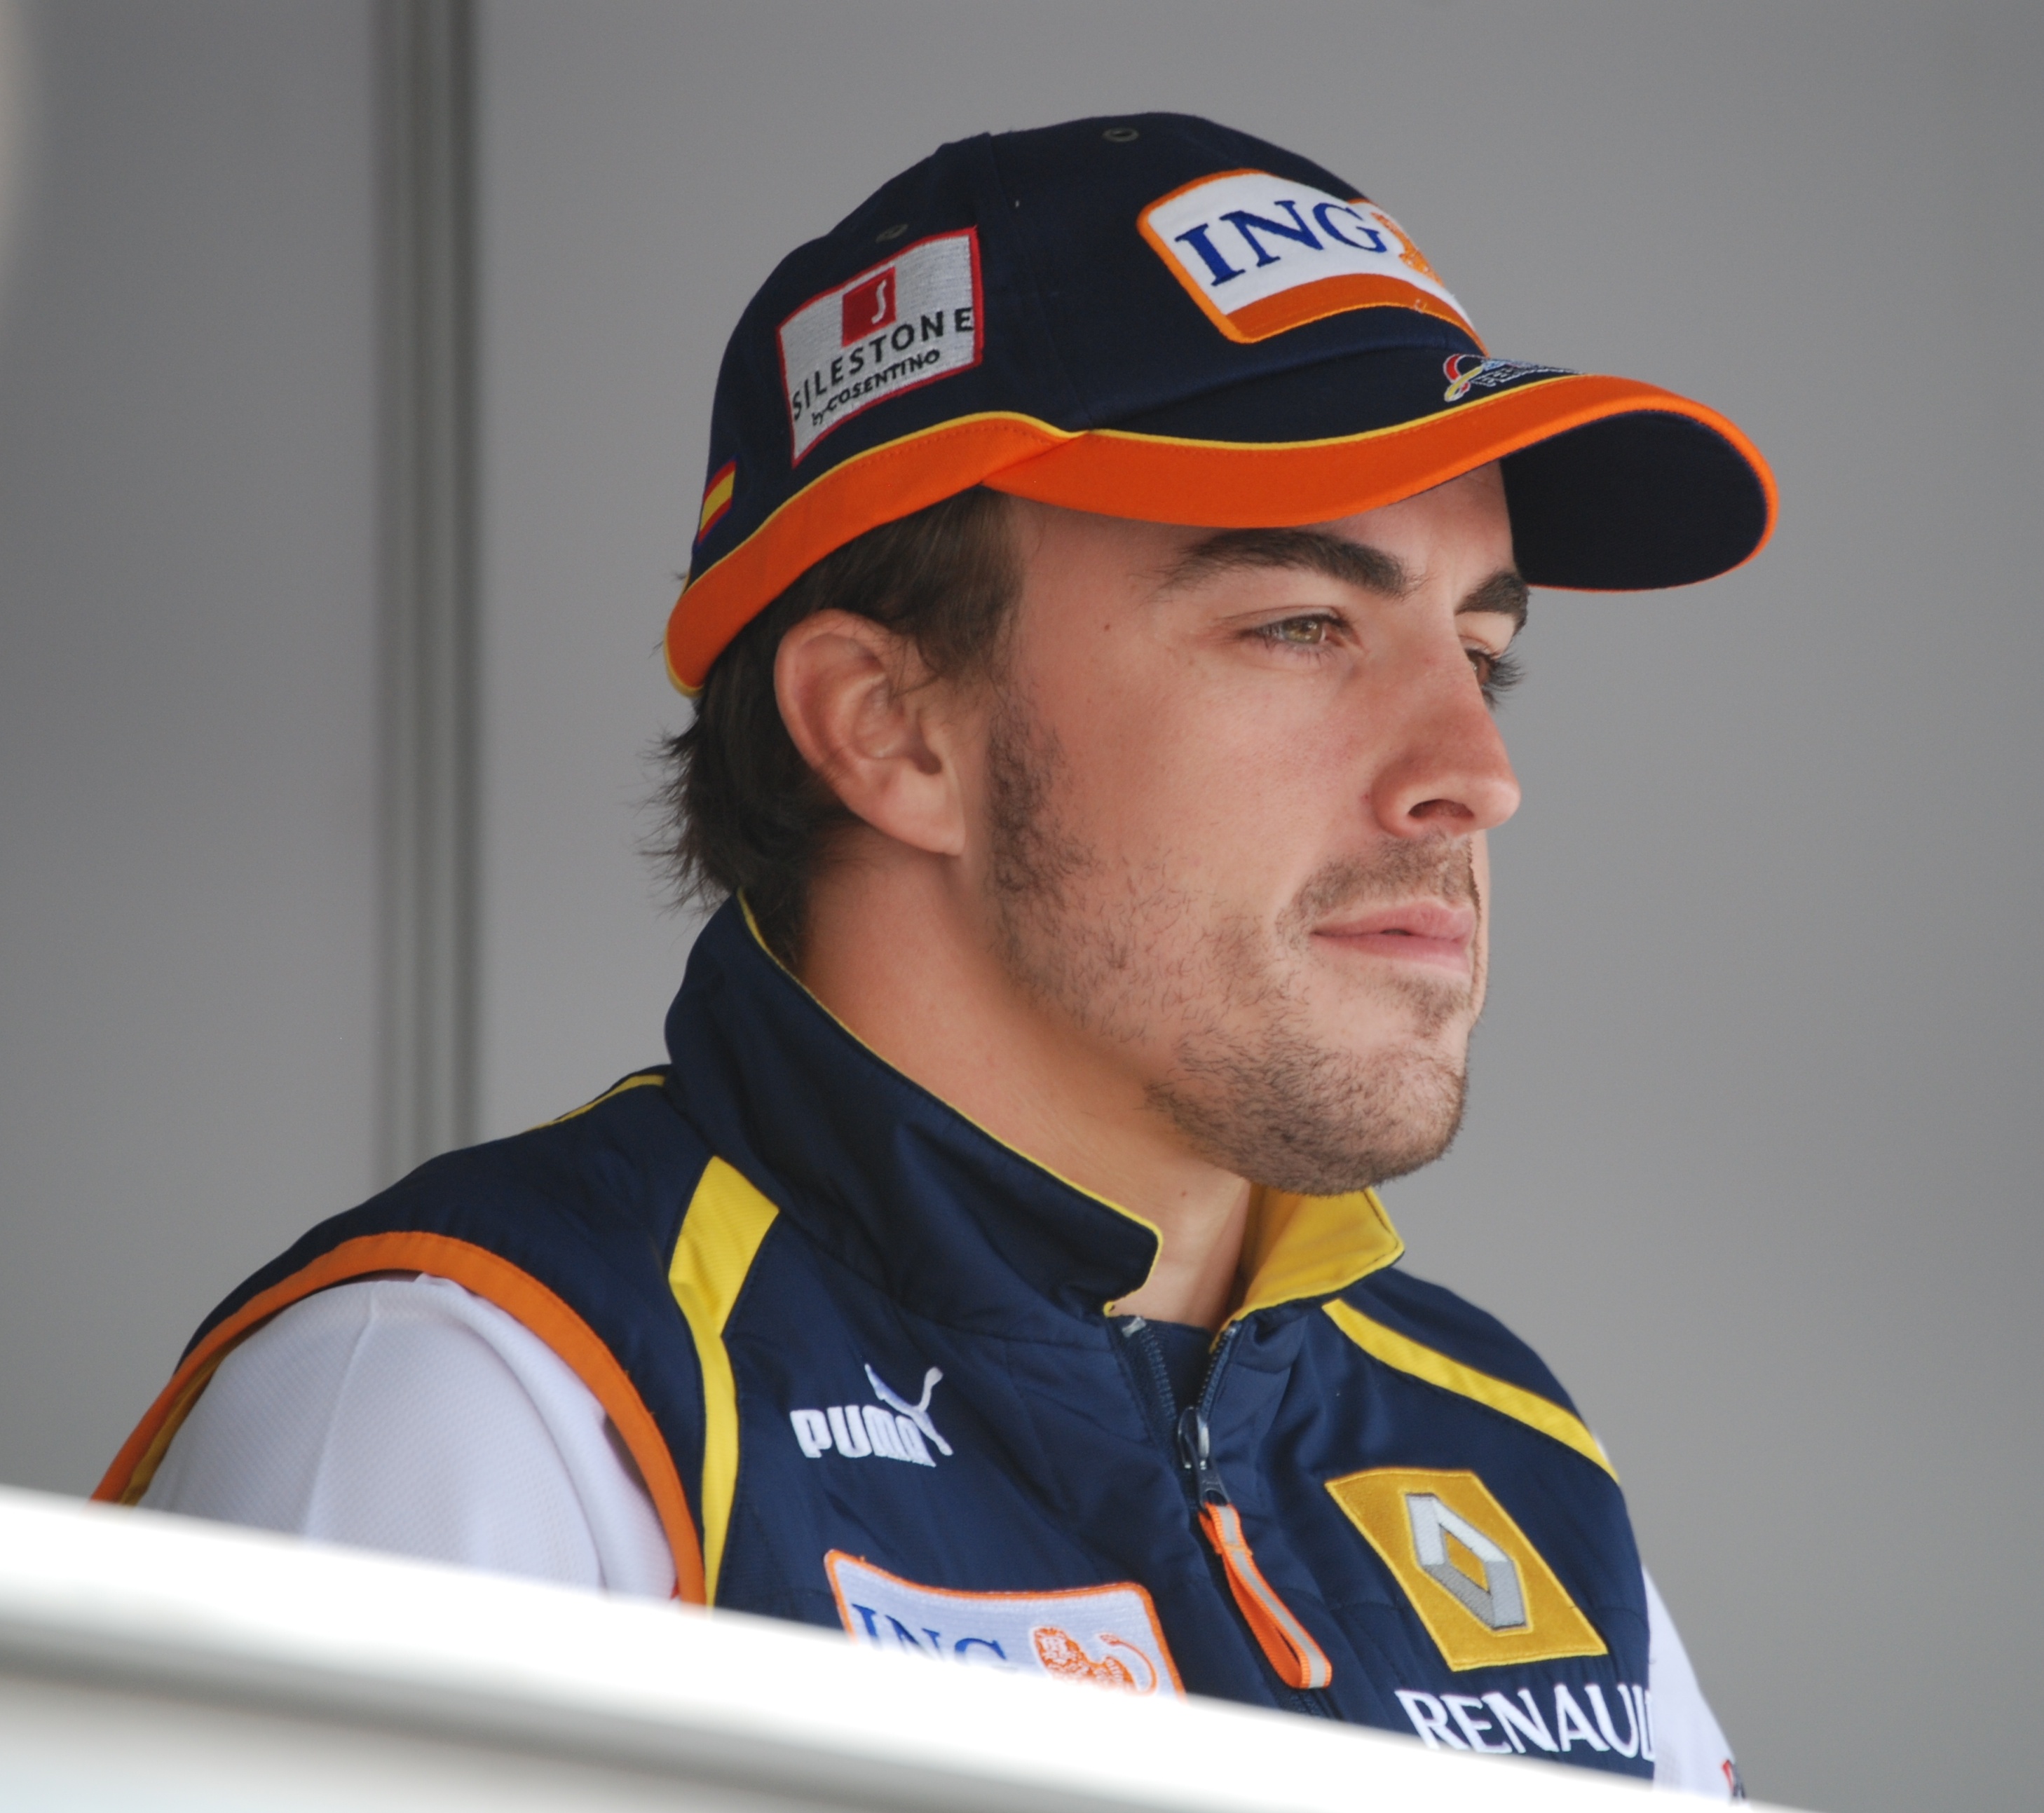 Fernando Alonso says there is no issue of age on his F1 comeback